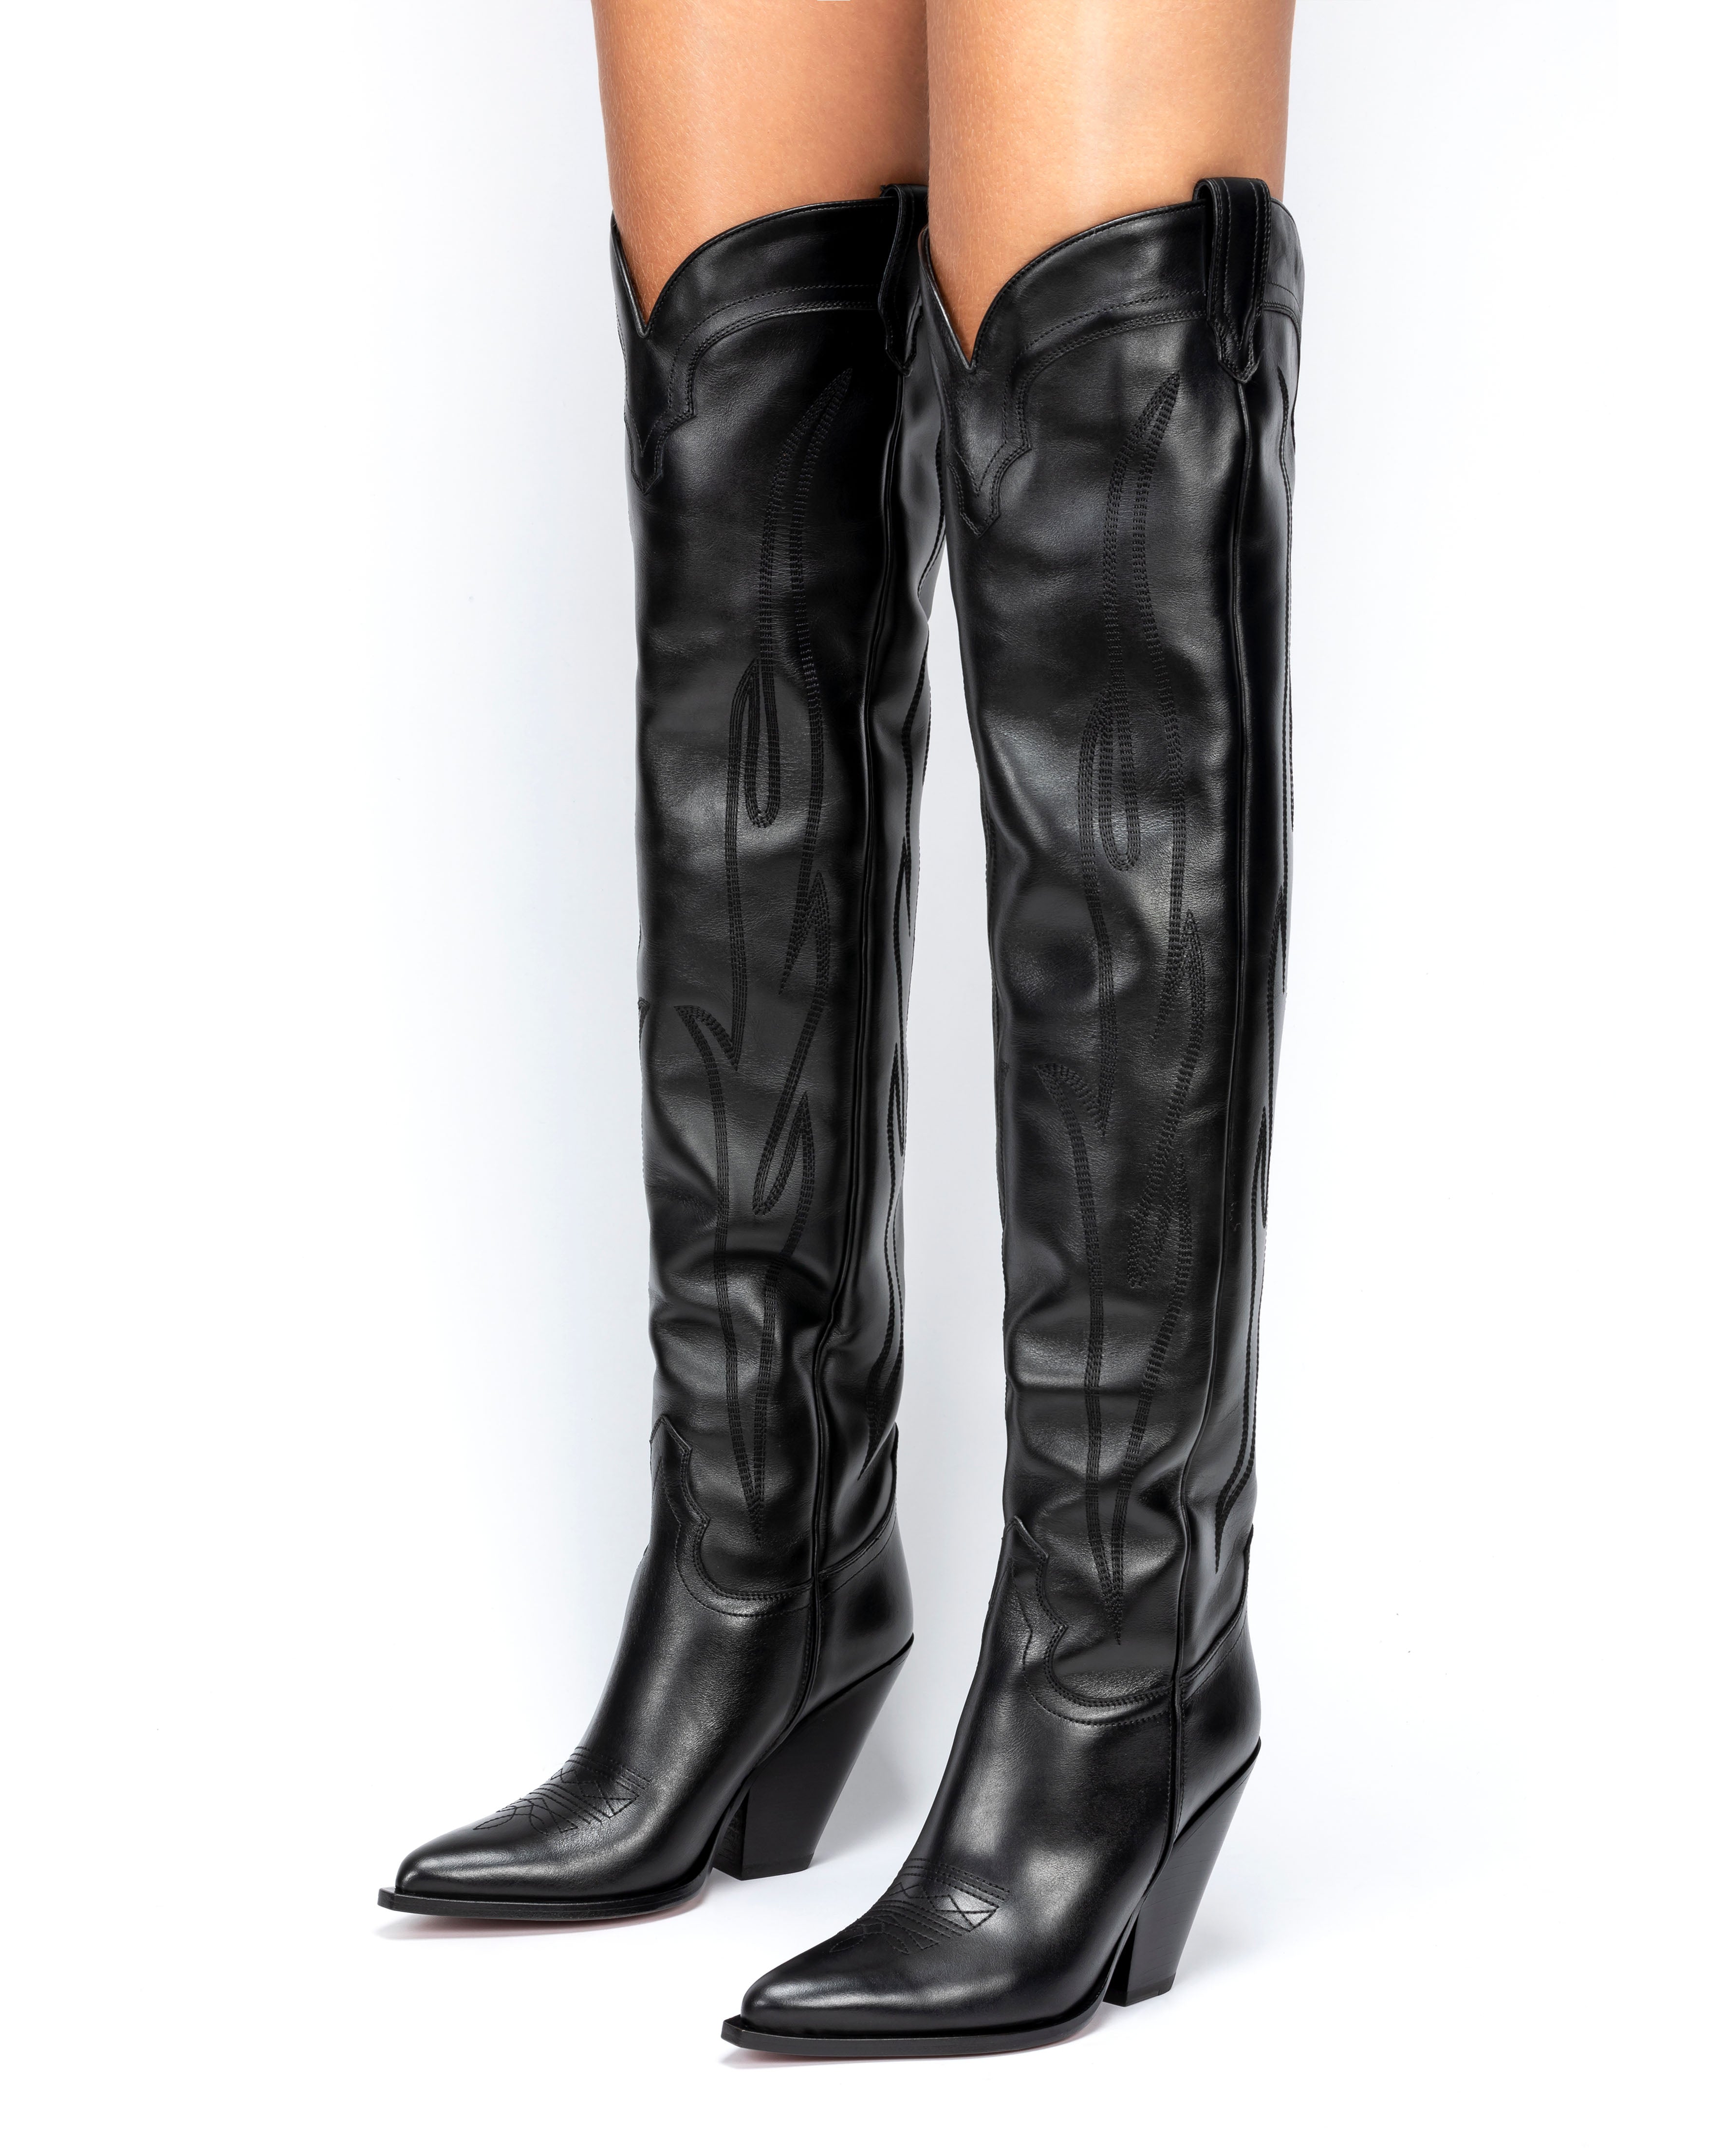 HERMOSA-90-Women_s-Over-The-Knee-Boots-in-Black-Calfskin--On-Tone-Embroidery_04